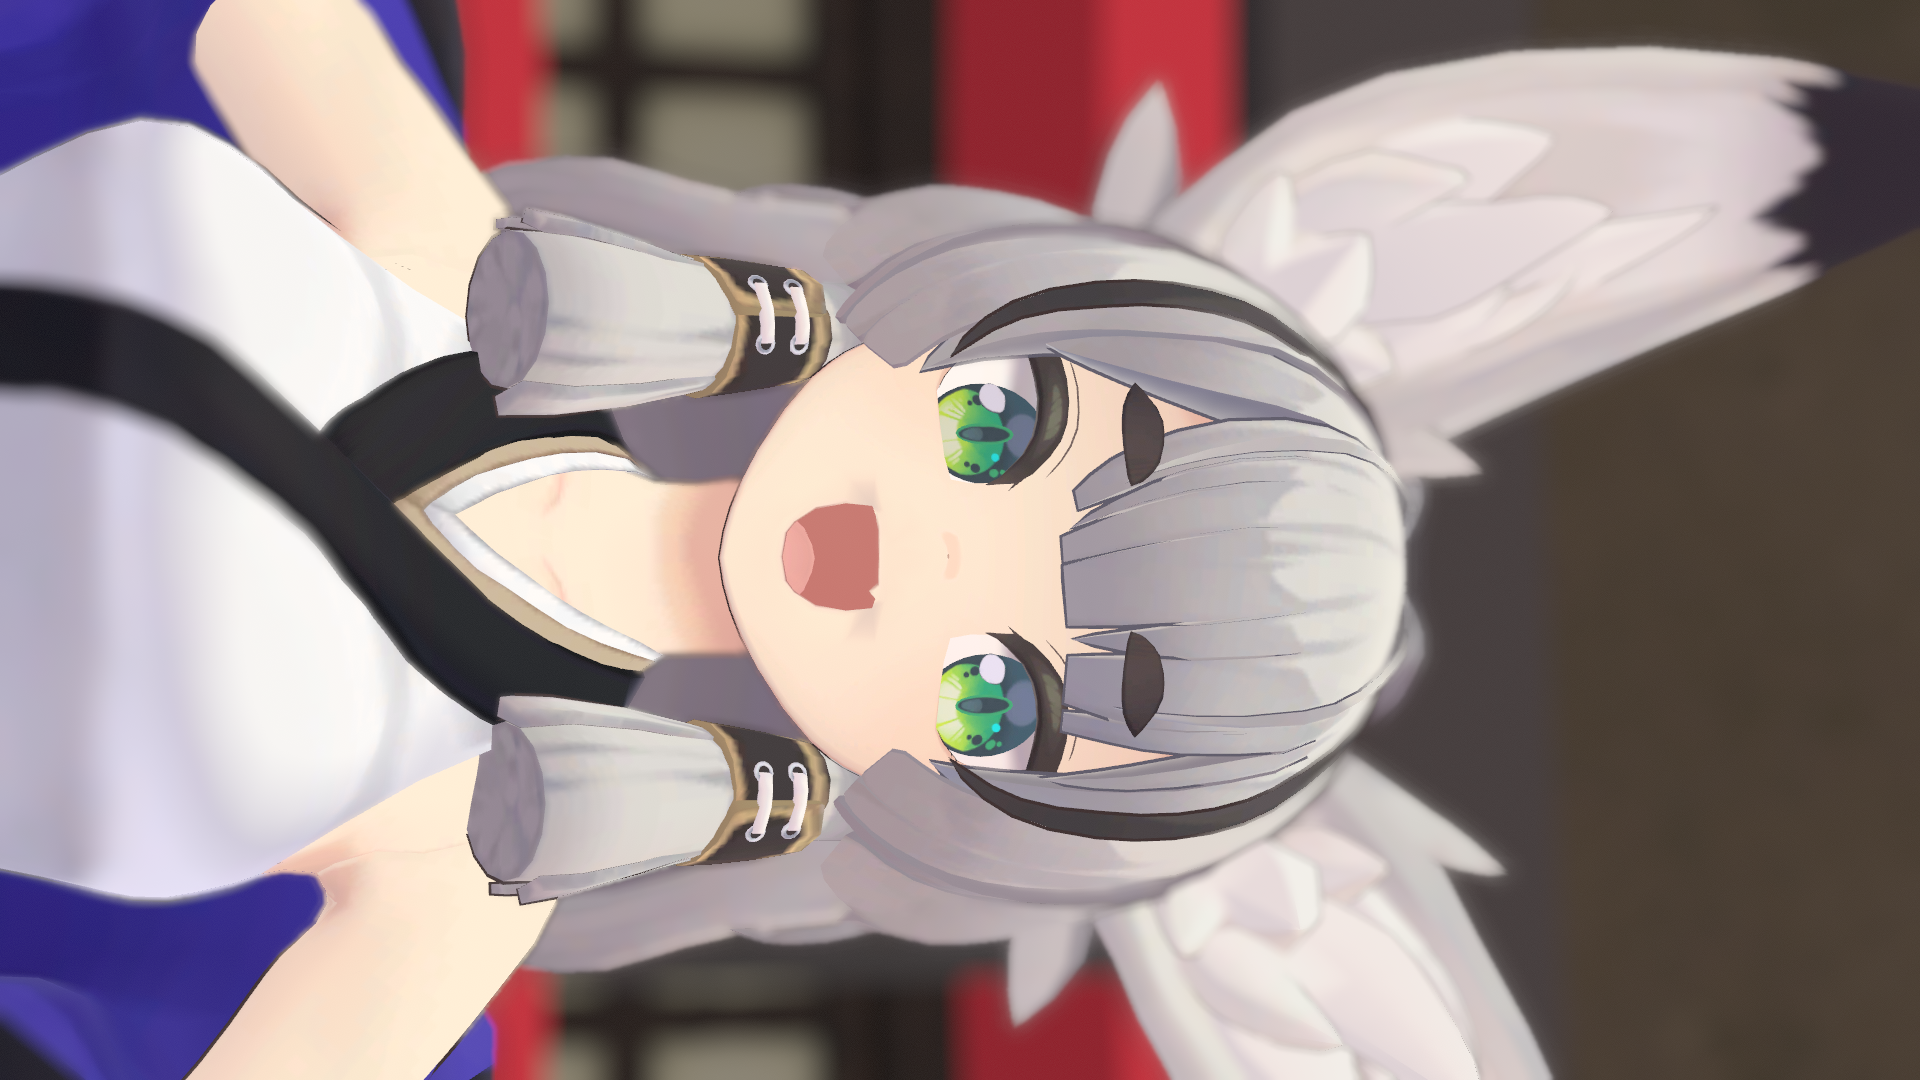 VRChat_1920x1080_2021-12-05_05-23-29.344.png